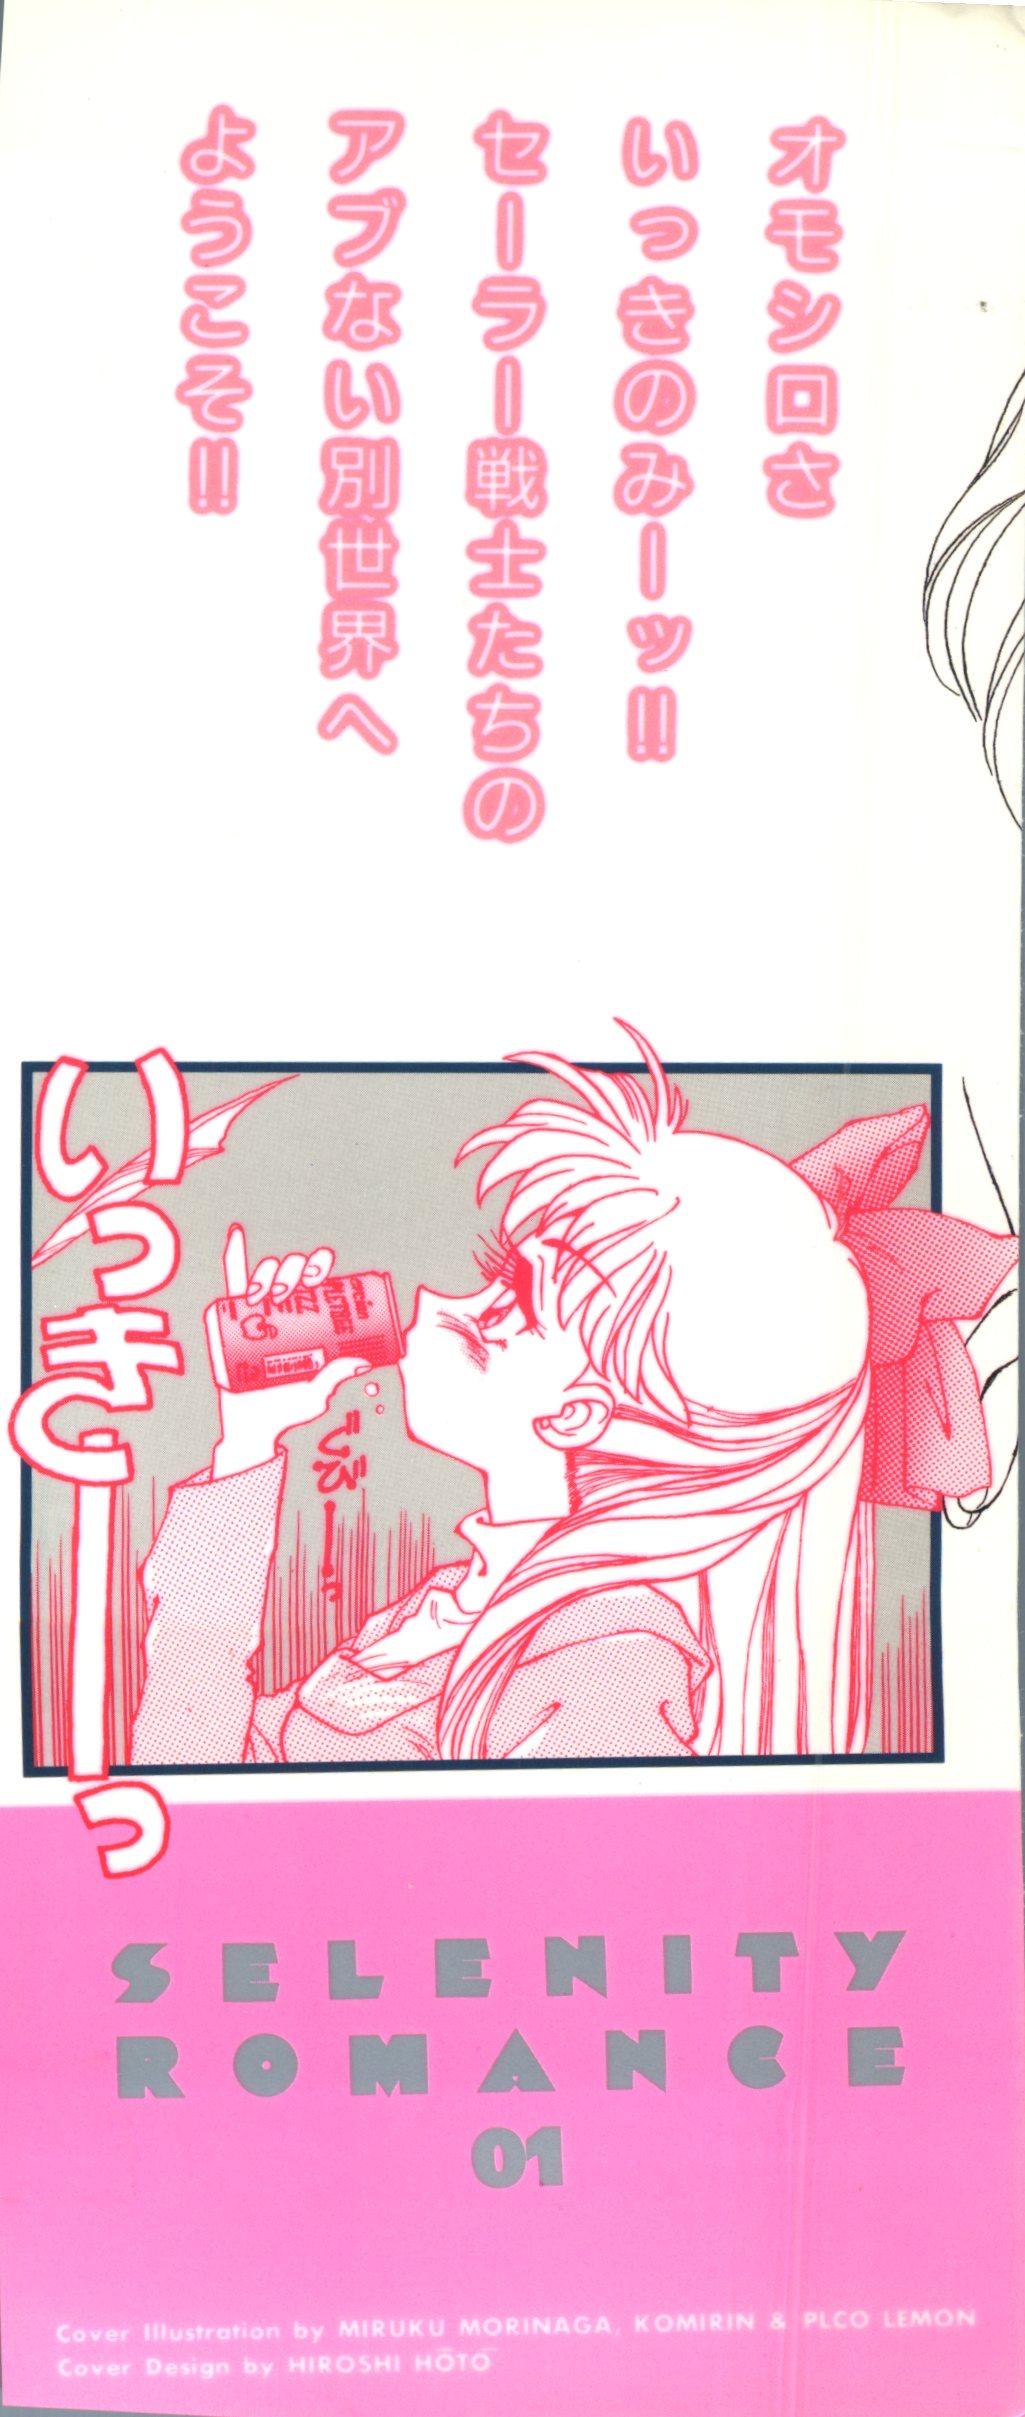 Blowing Selenity Romance - Sailor moon Throat - Page 2